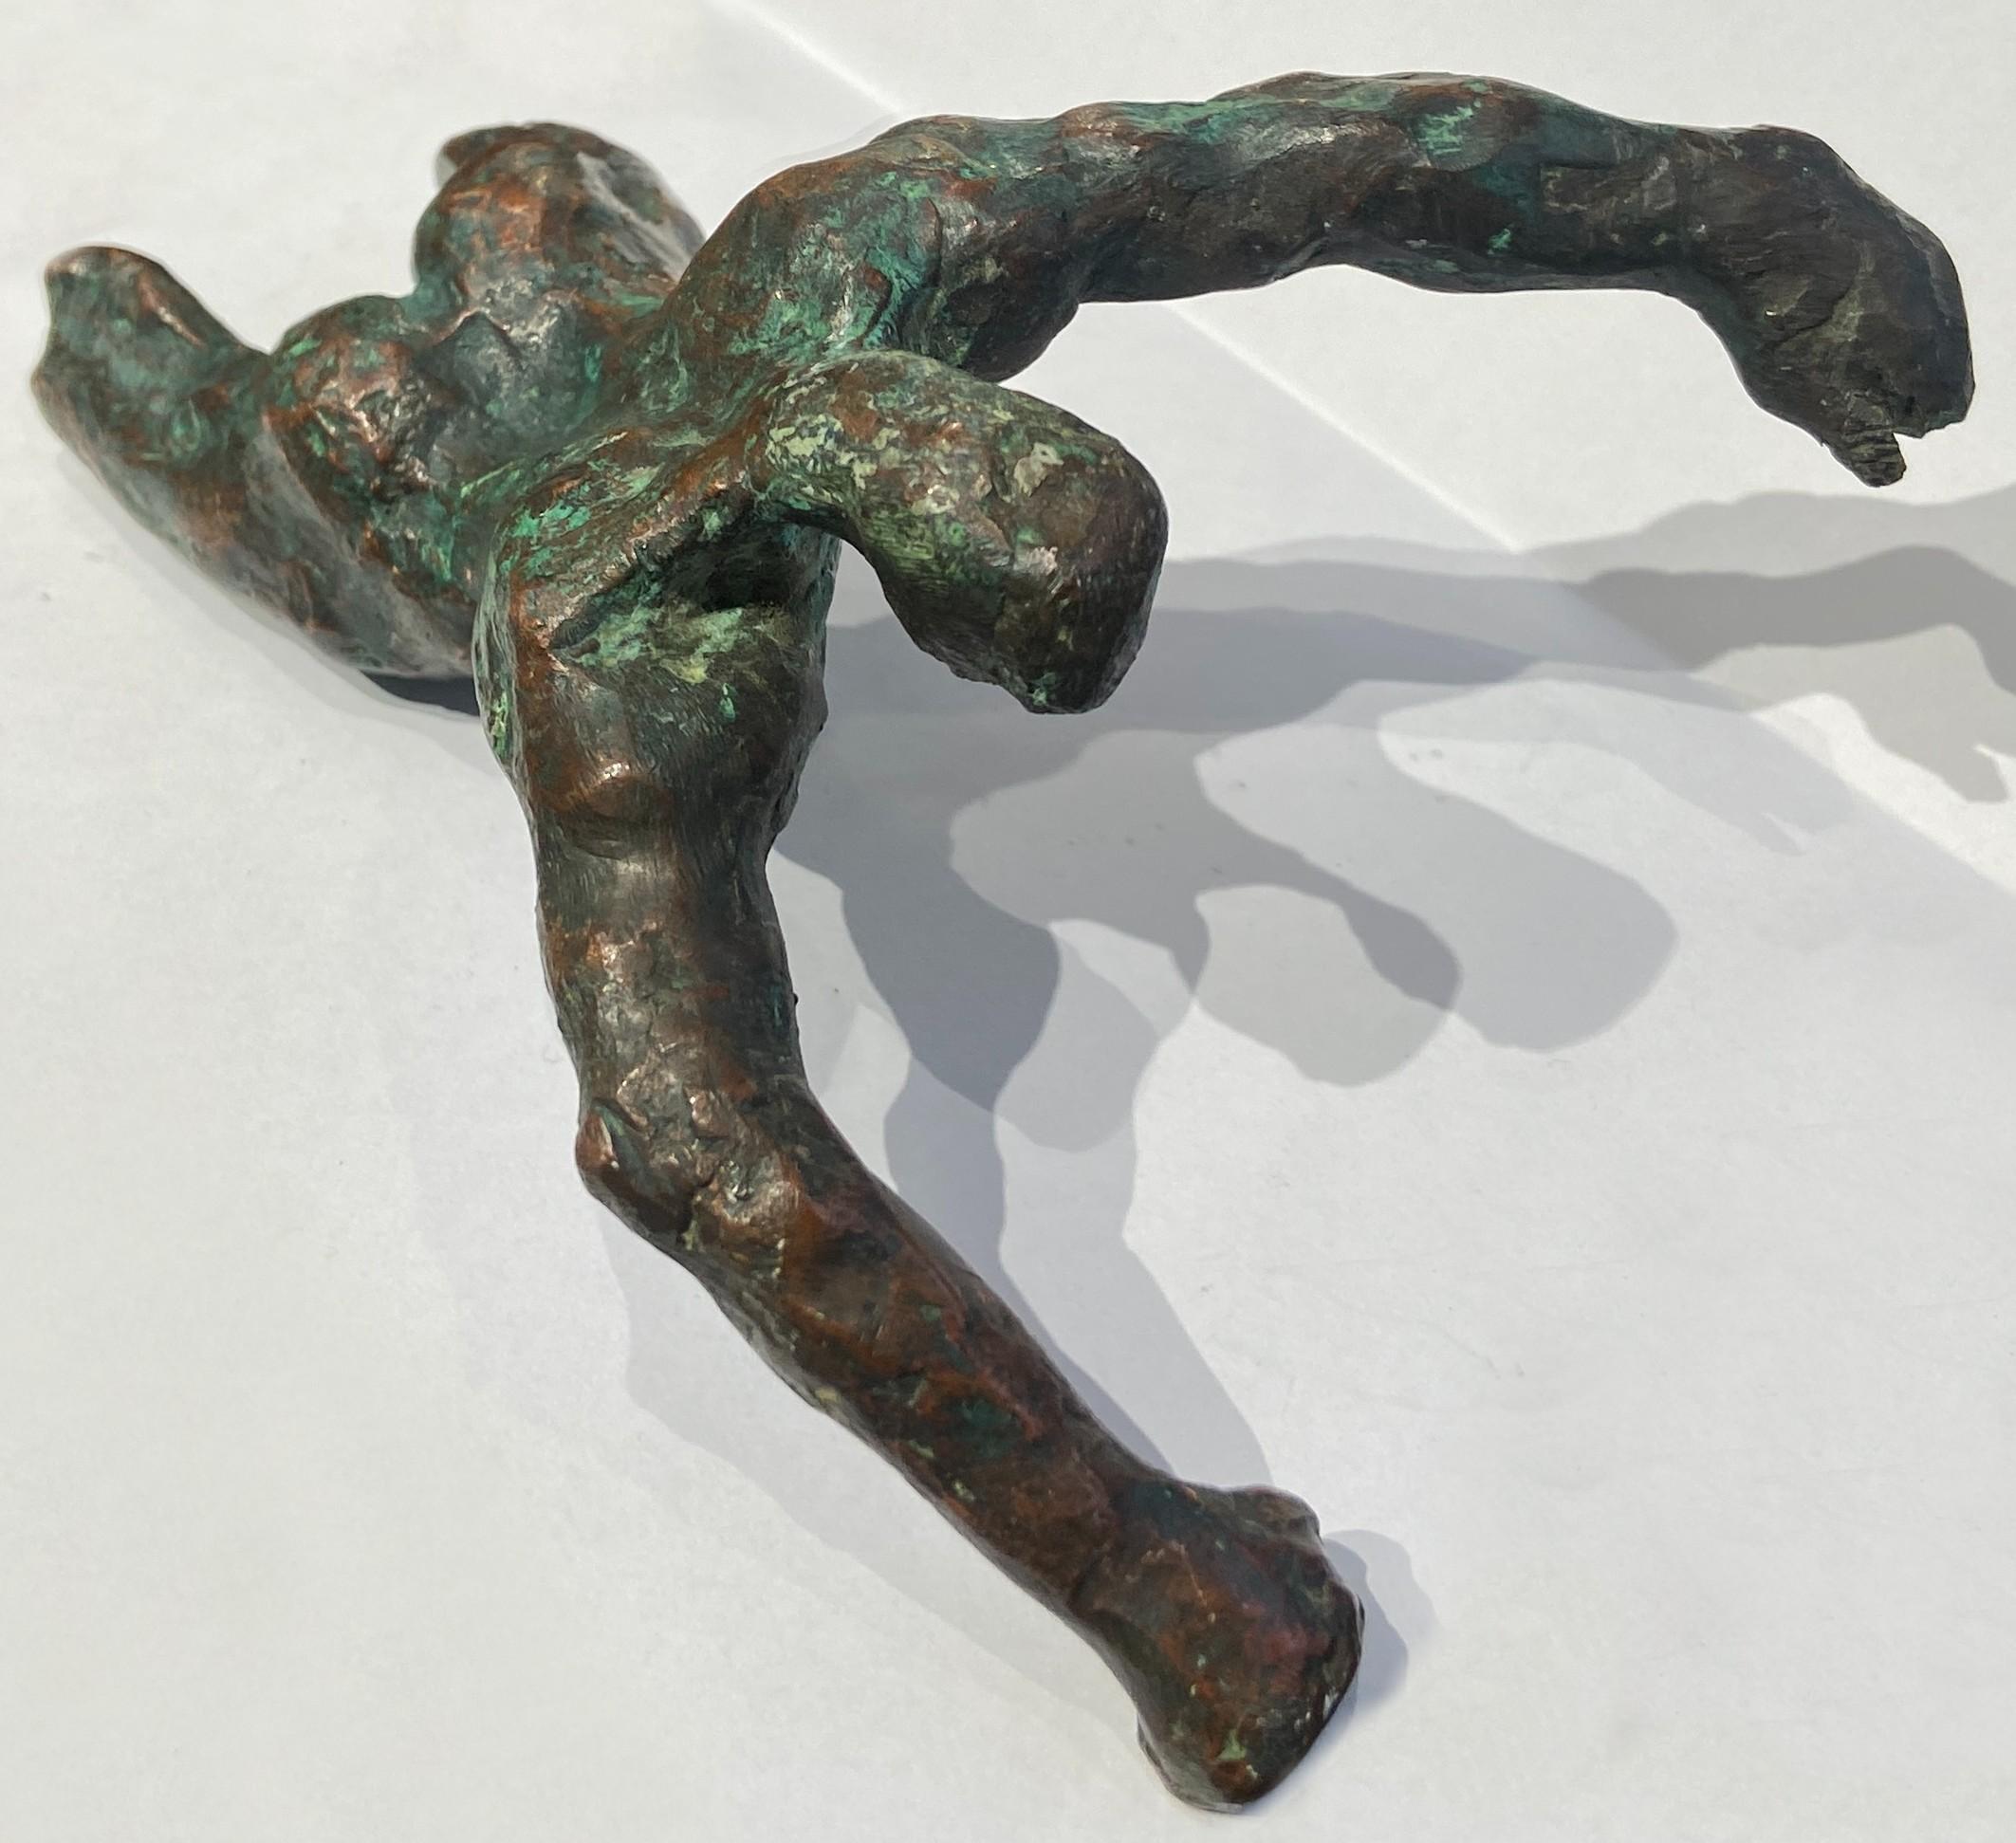 The Swimmer, Bronze Casted Sculpture, 20th Century, English School - Gold Figurative Sculpture by Henry Moore